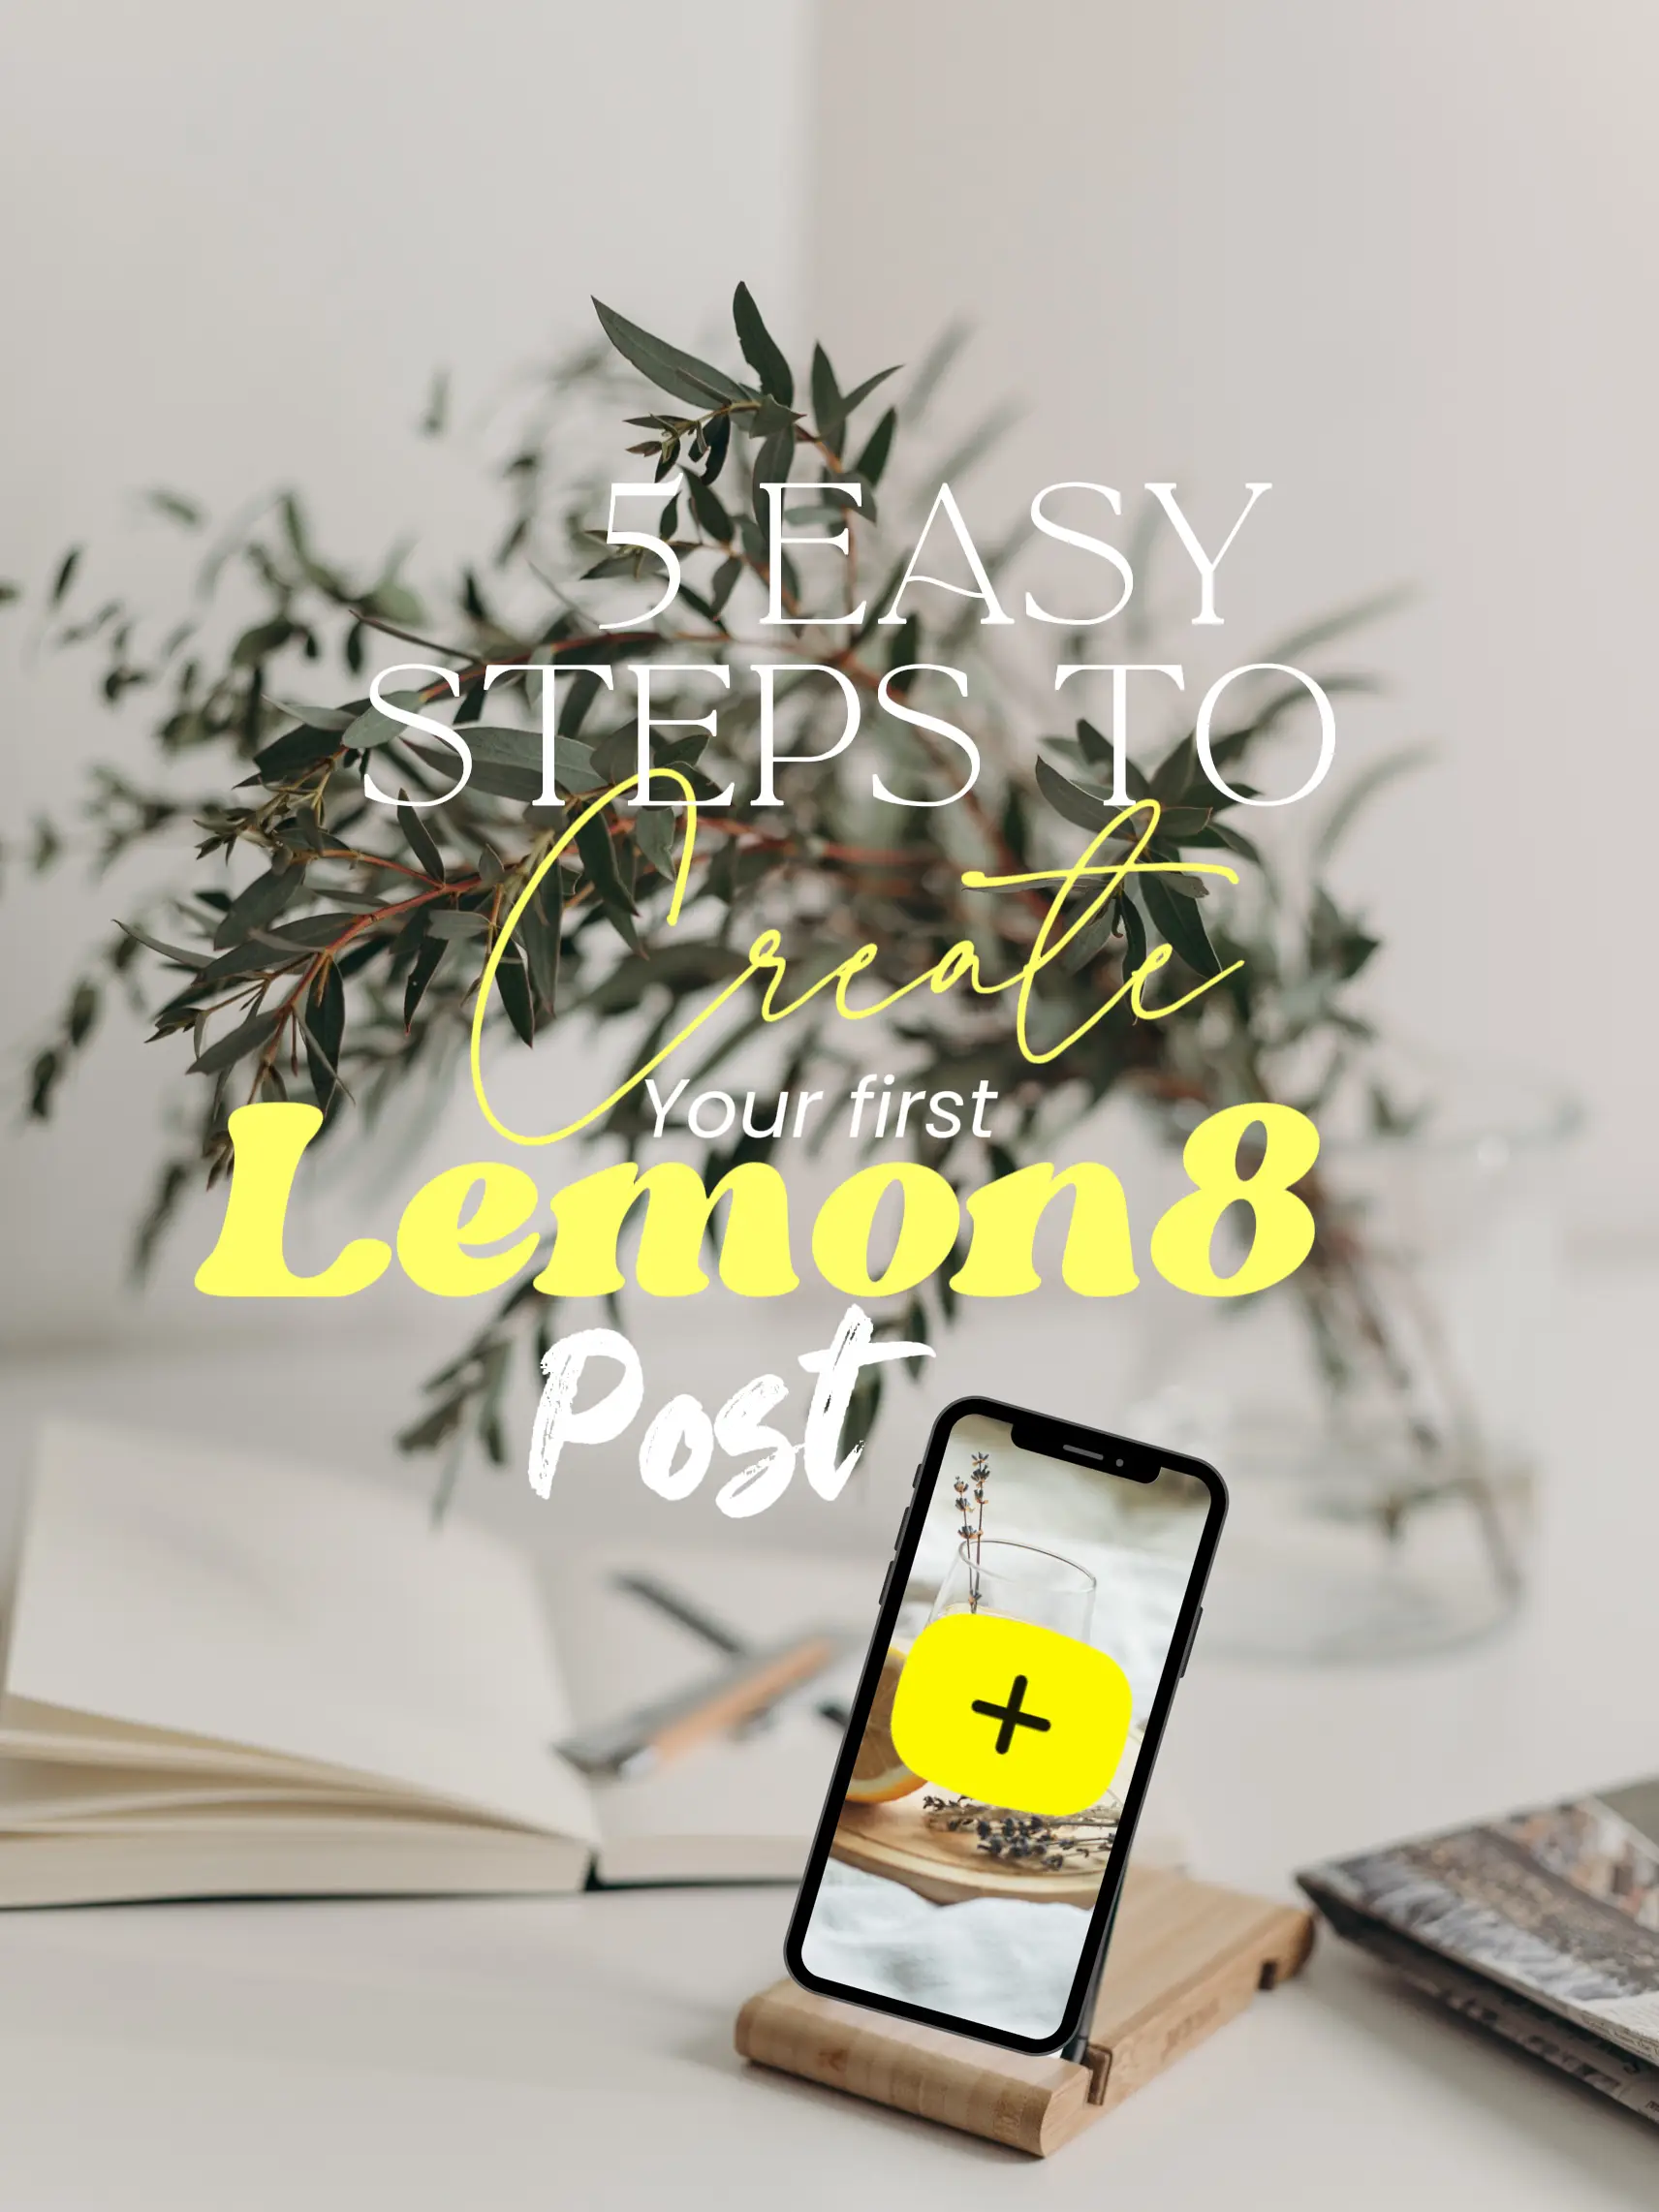 5 Easy Steps For Creating Your Lemon8🍋 Posts's images